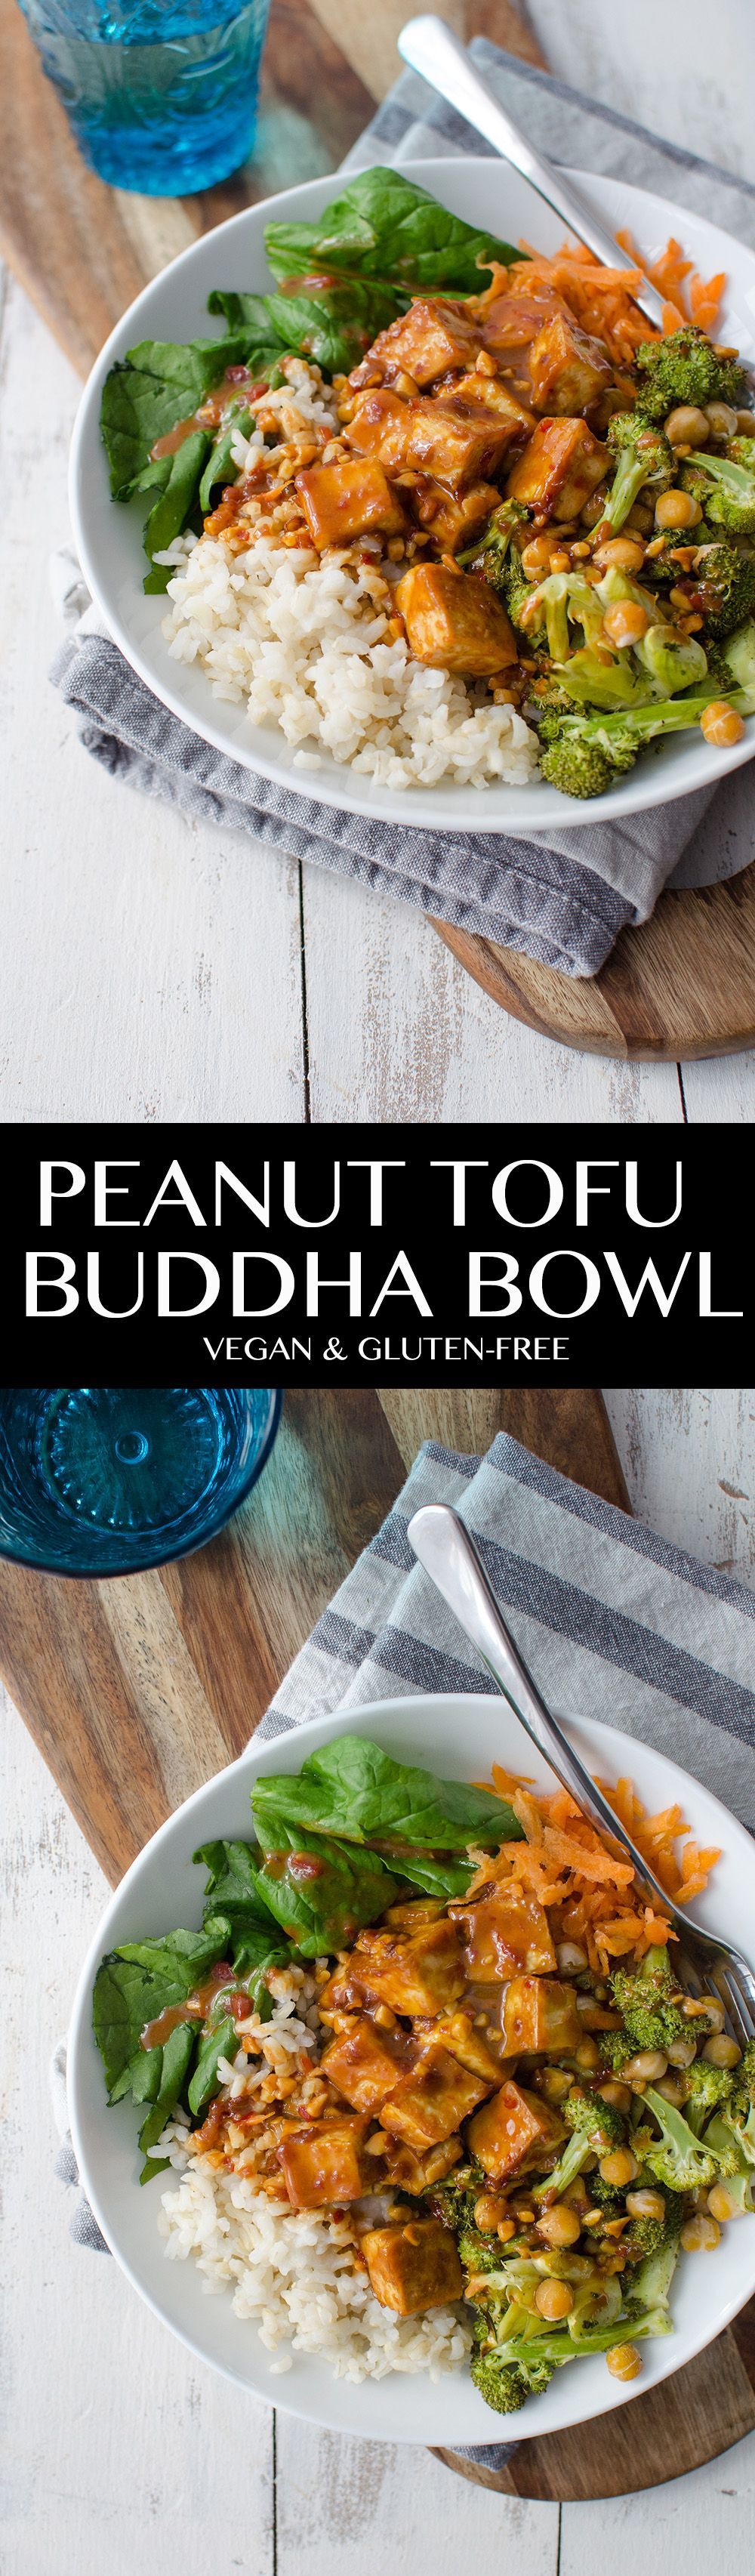 Peanut Tofu Buddha Bowl! A healthy lunch or dinner, perfect for the New Year! Brow